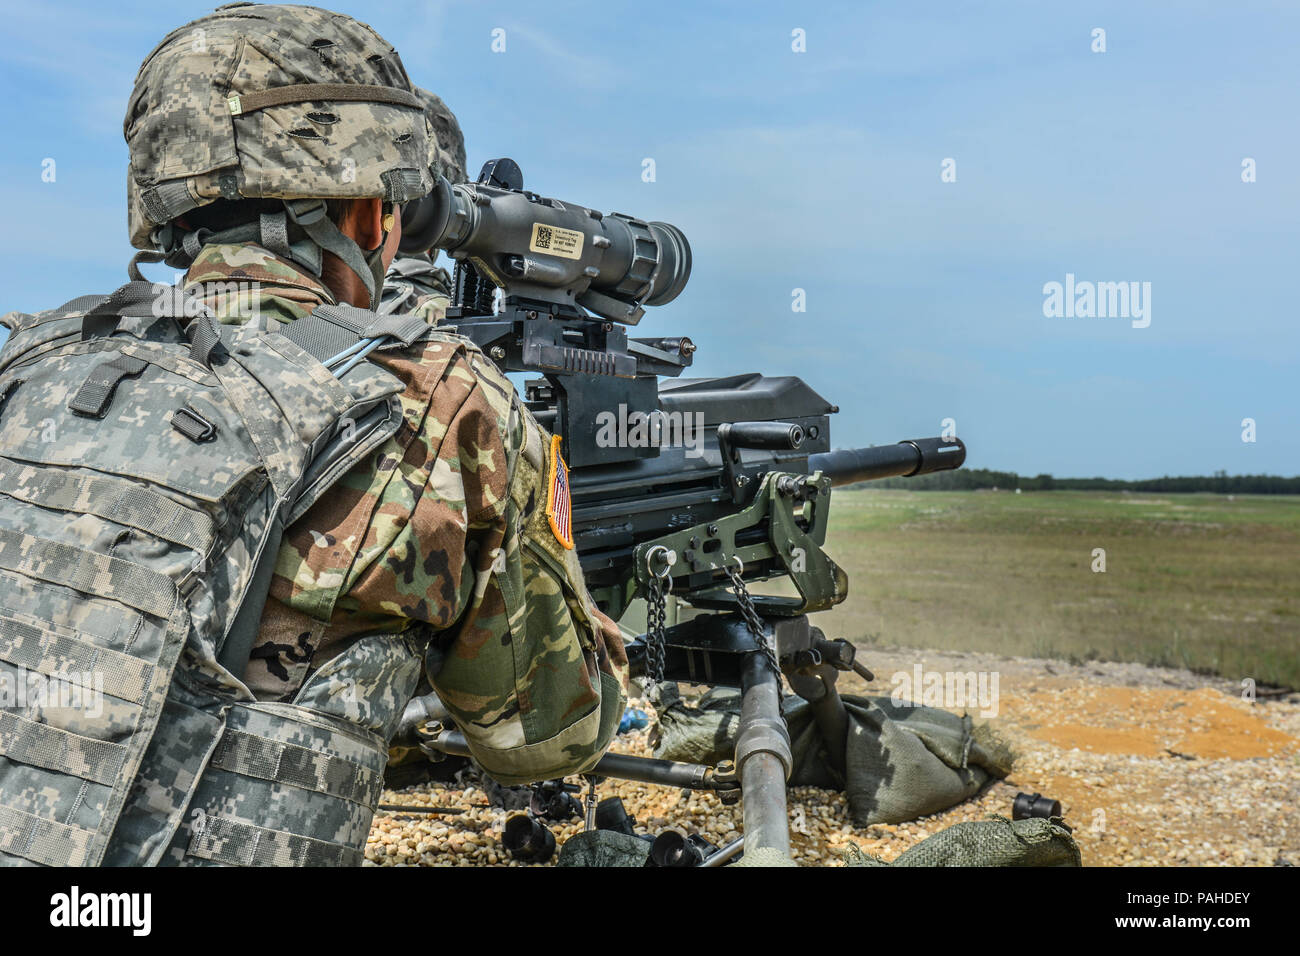 A U.S. Army Reserve Troop List Unit Soldier qualifies with a Mark 19 40 mm grenade machine gun during Operation Cold Steel II, hosted by U.S. Army Civil Affairs and Psychological Operations Command (Airborne), July 13, 2018 at Joint Base McGuire-Dix-Lakehurst, N.J. Operation Cold Steel is the U.S. Army Reserve's crew-served weapons qualification and validation exercise to ensure America's Army Reserve units and Soldiers are trained and ready to deploy on short notice as part of Ready Force X and bring combat-ready and lethal firepower in support of the Army and our joint partners anywhere arou Stock Photo